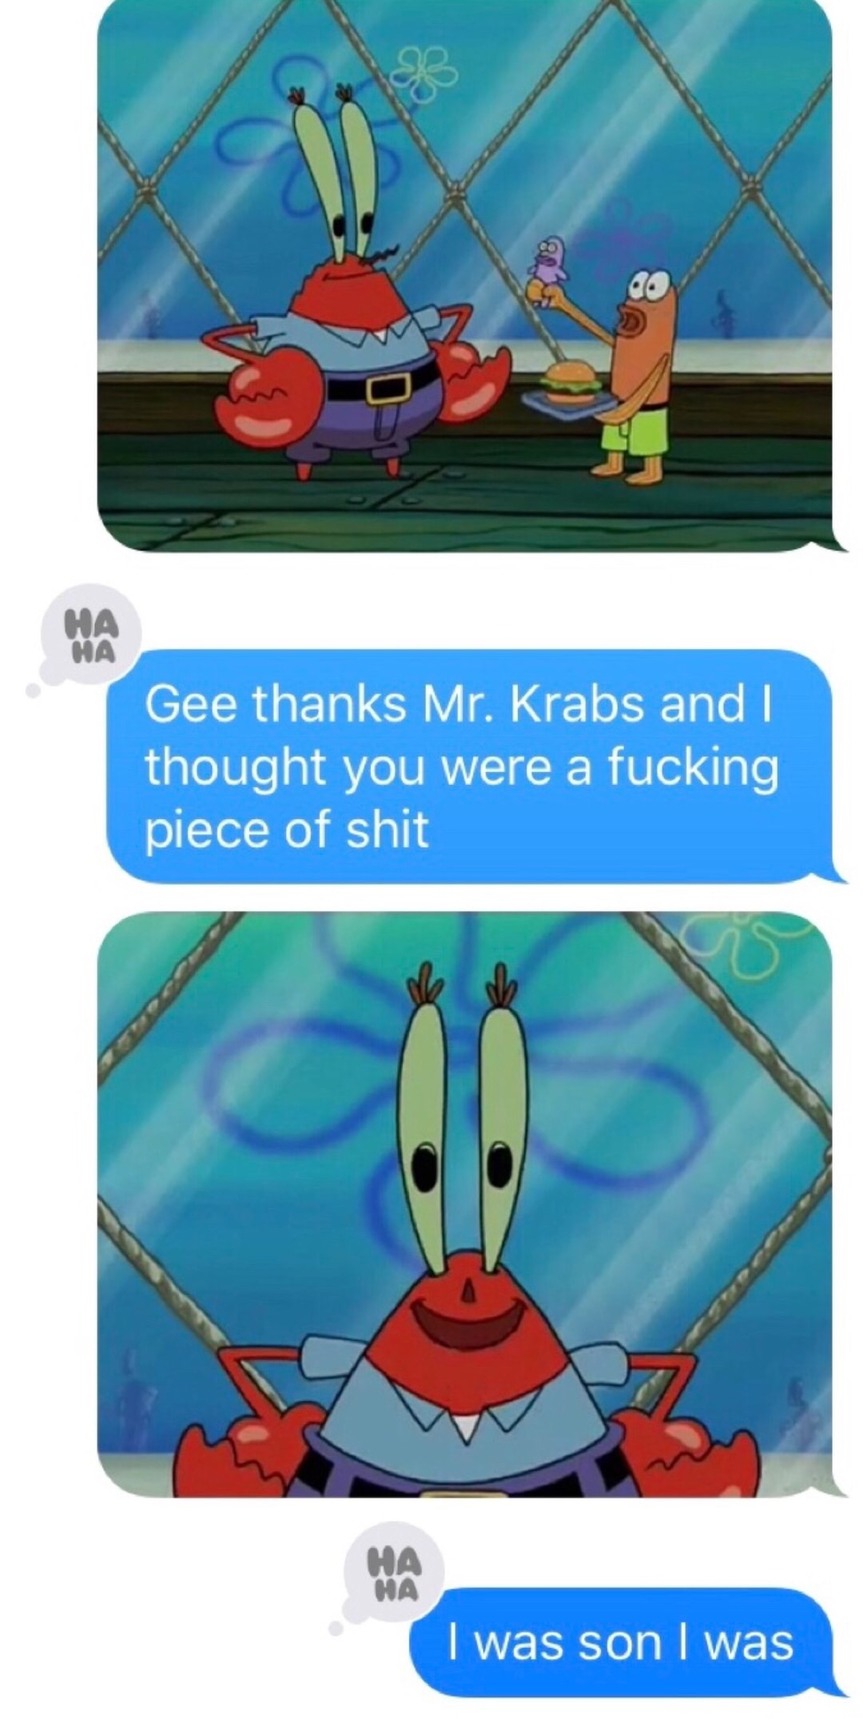 gee mr. krabs and follow for follow - meme